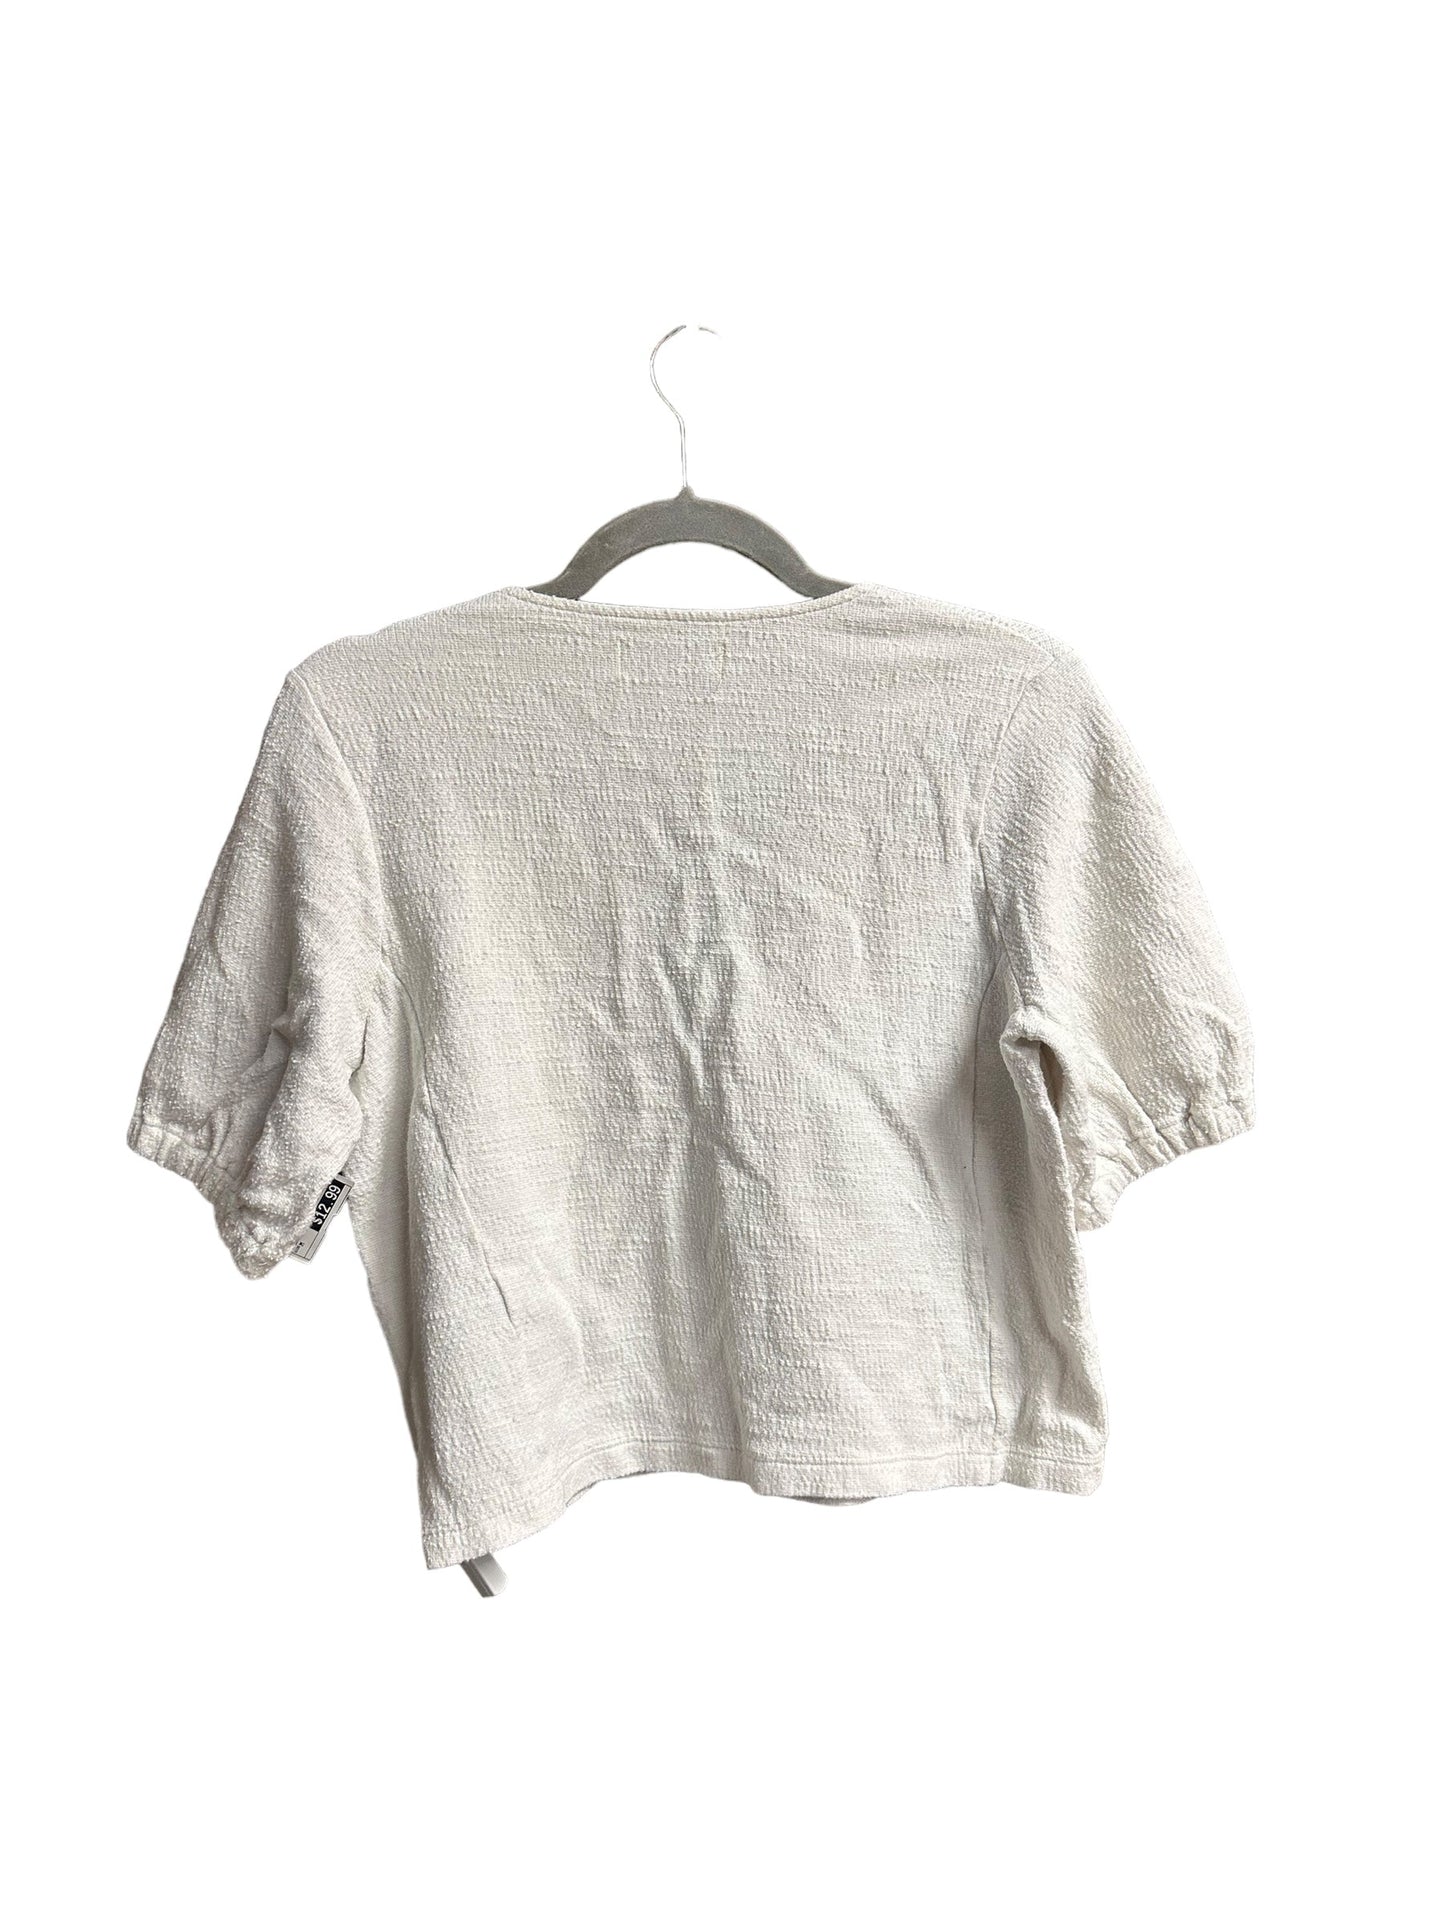 White Top Short Sleeve Madewell, Size M